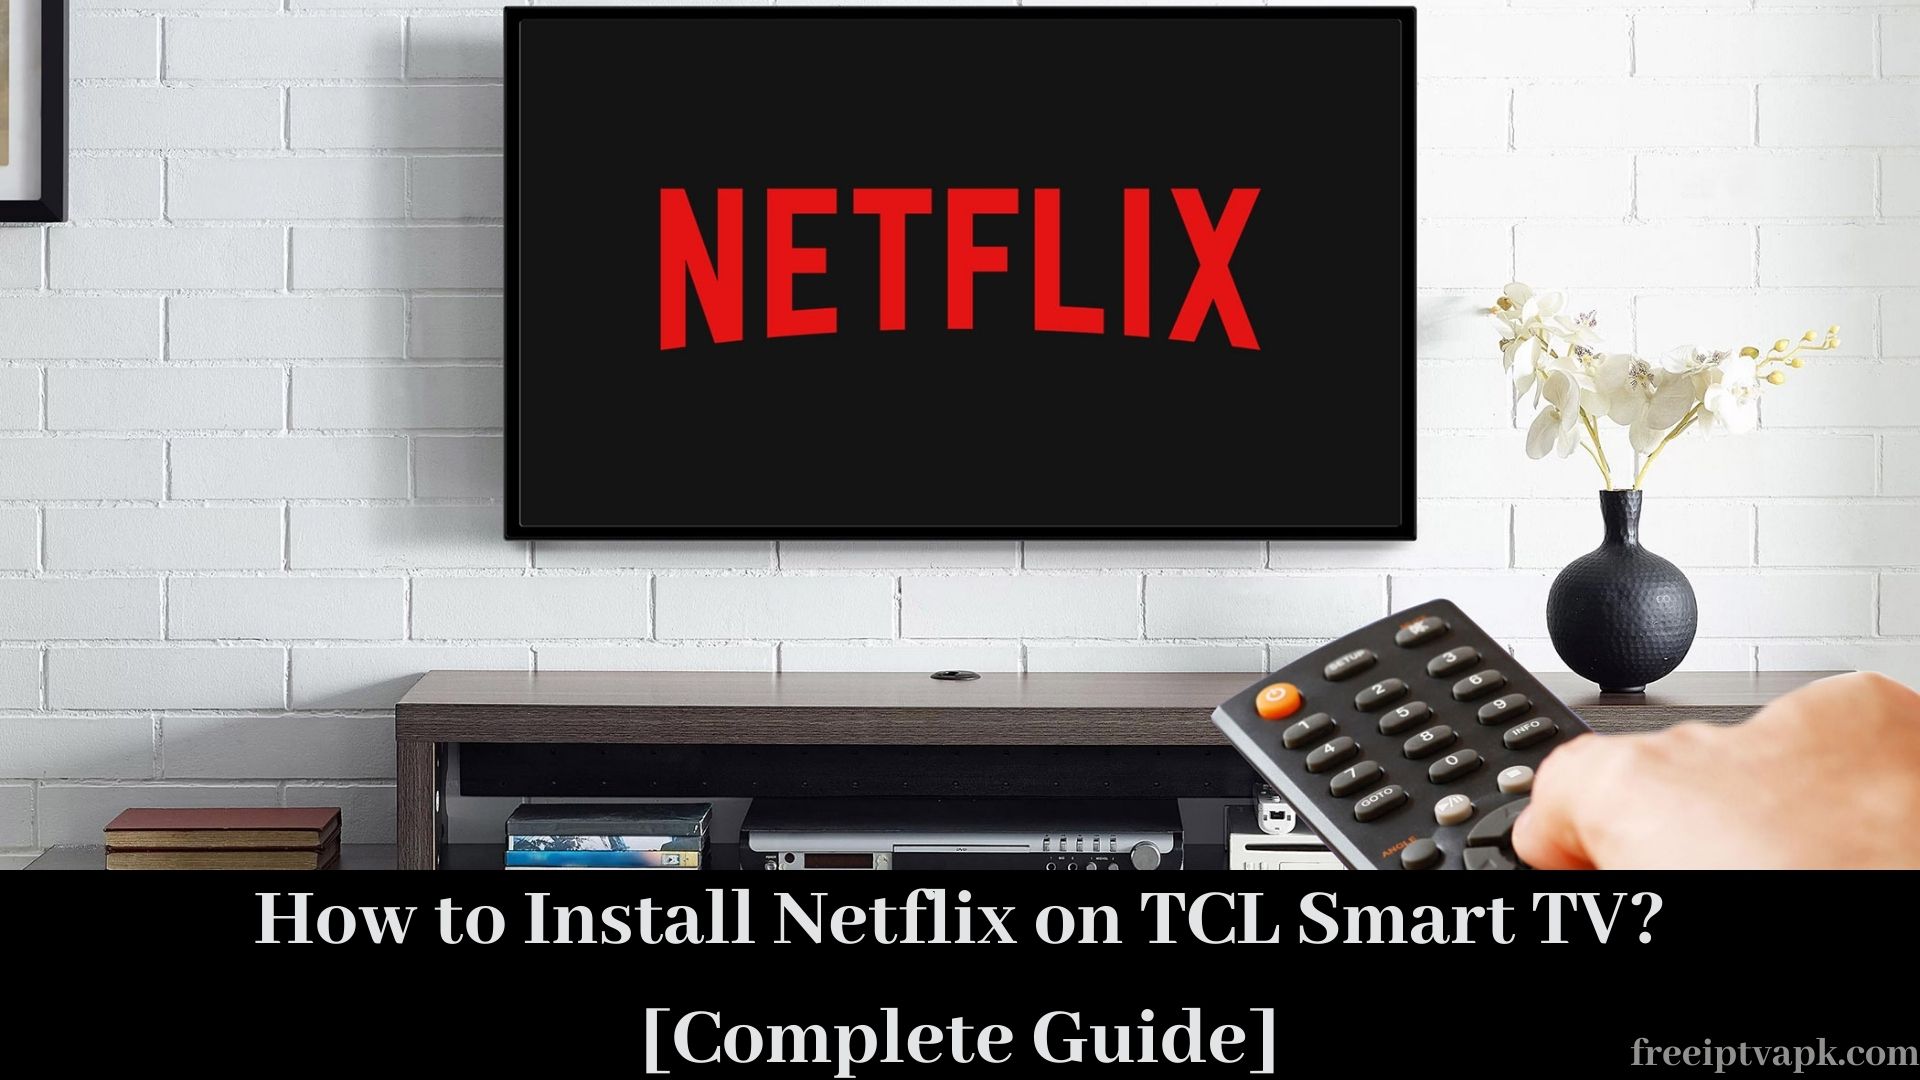 How to Install Netflix on TCL Smart TV? [Complete Guide]